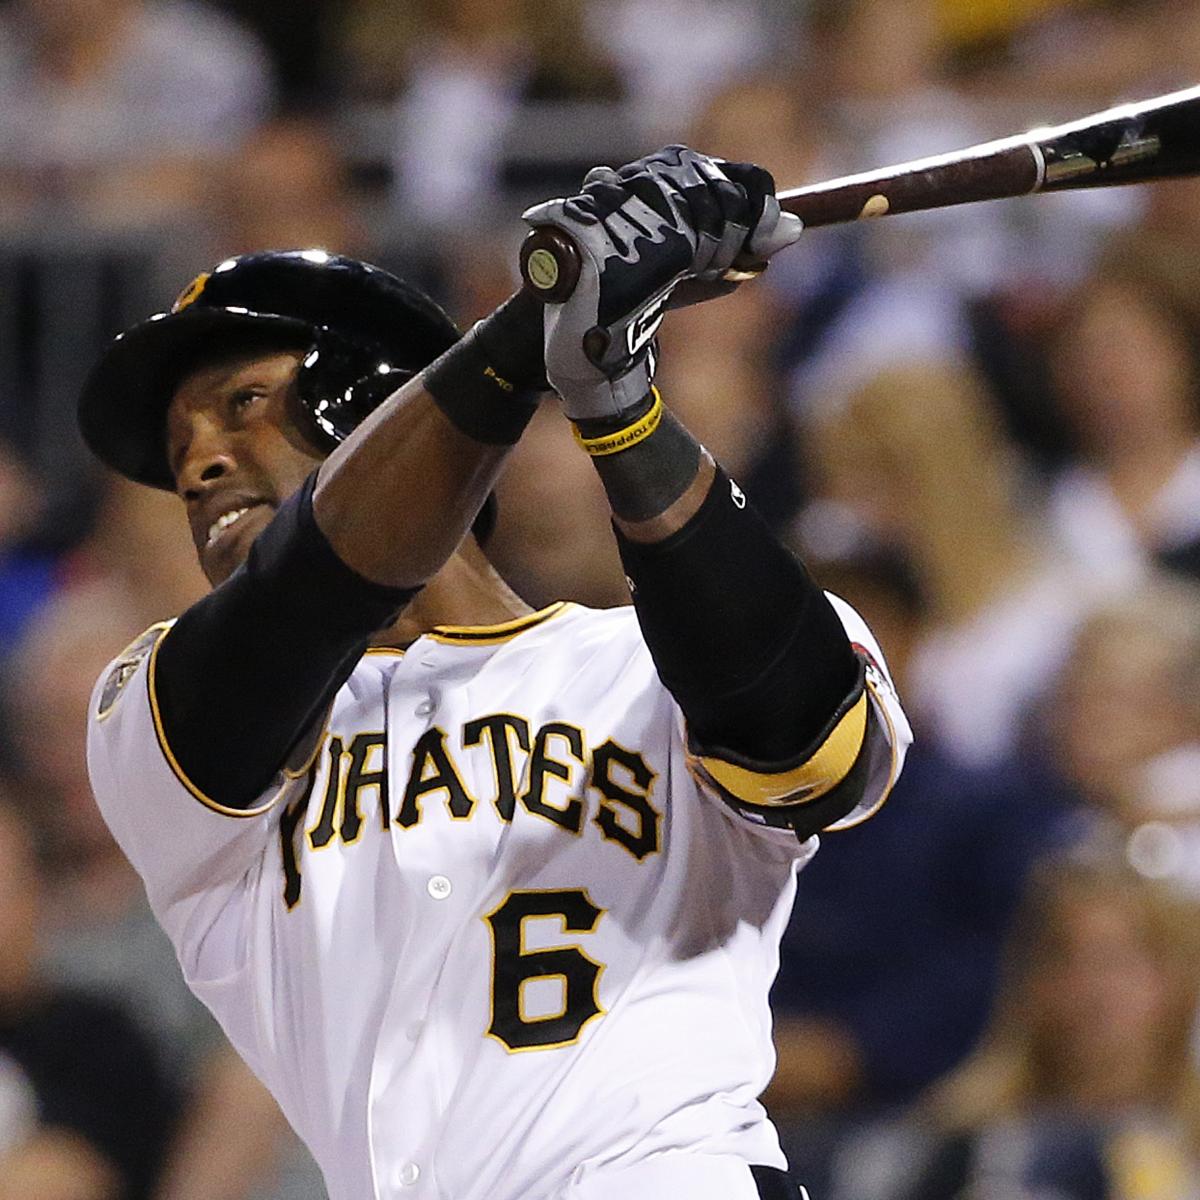 Pittsburgh Pirates Players Who Could Have Breakout Seasons in 2015